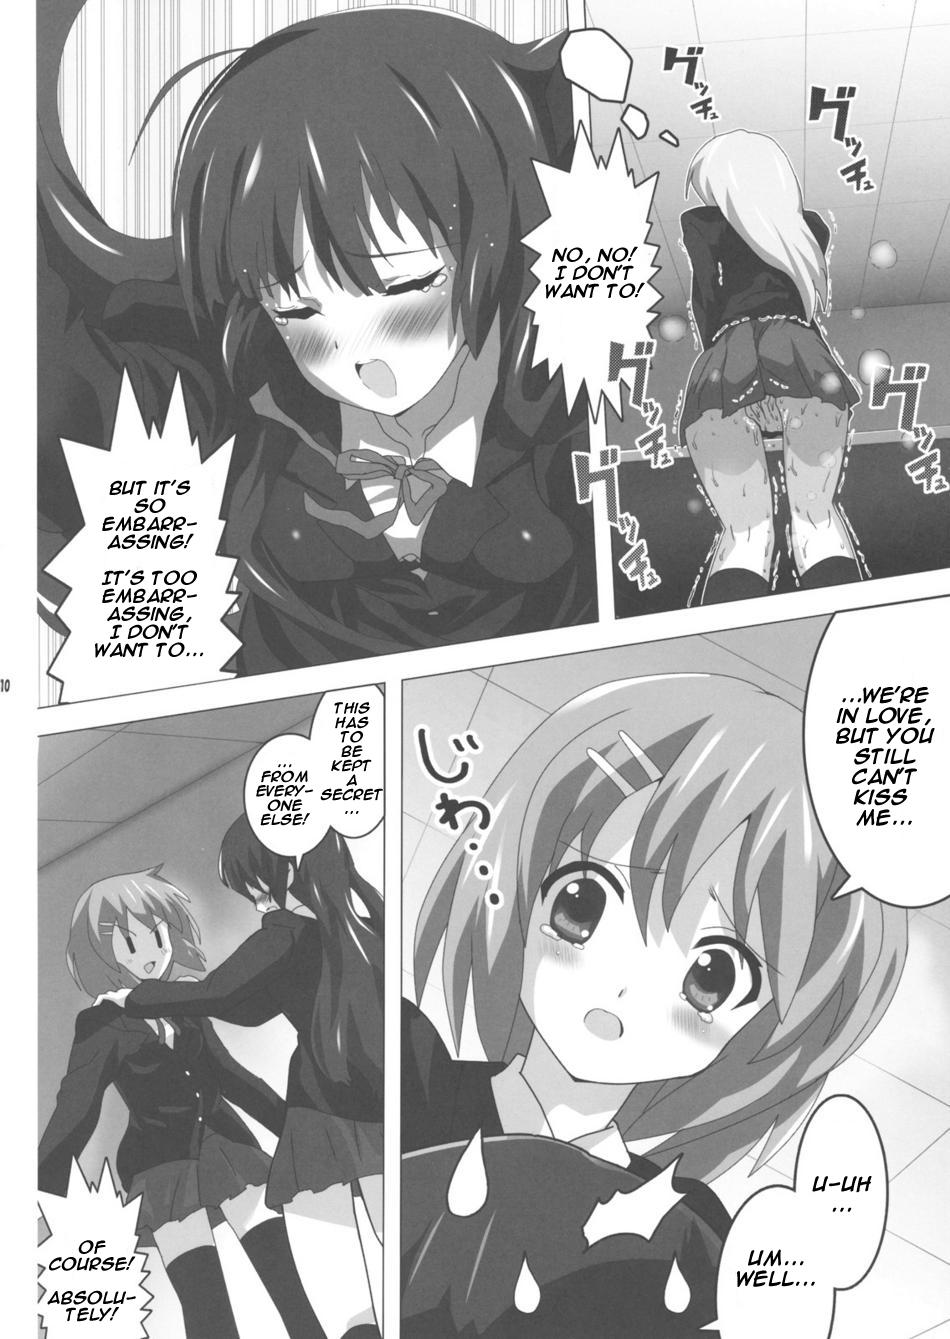 Stripping K-ON Bon?! - K-on Gay Medical - Page 12